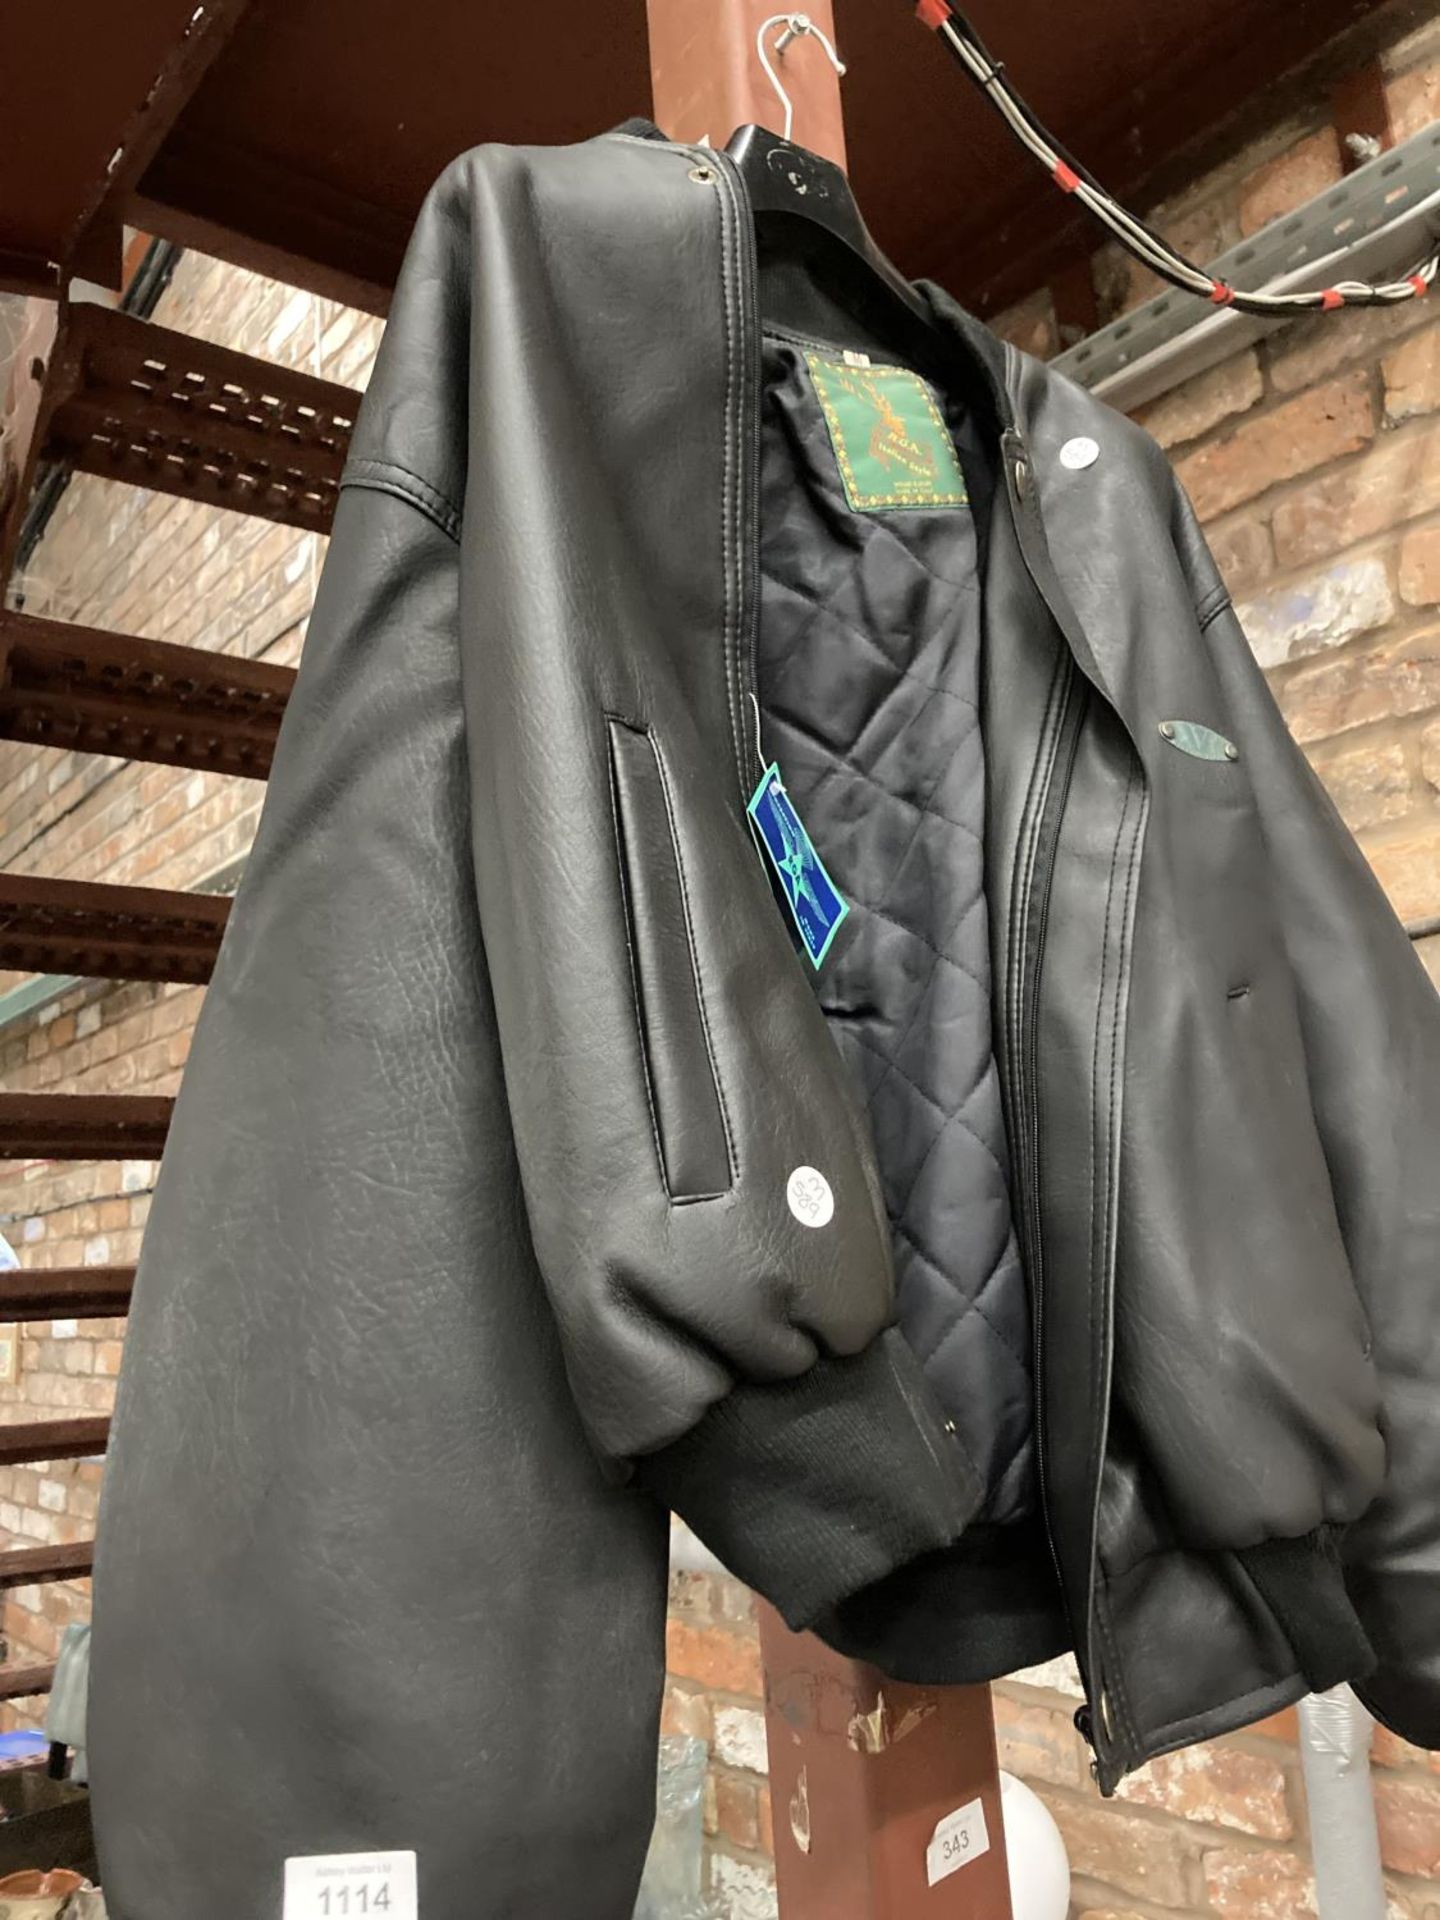 AN AS NEW ITALIAN BLACK LEATHER LOOK JACKET IN MEDIUM - Image 2 of 5